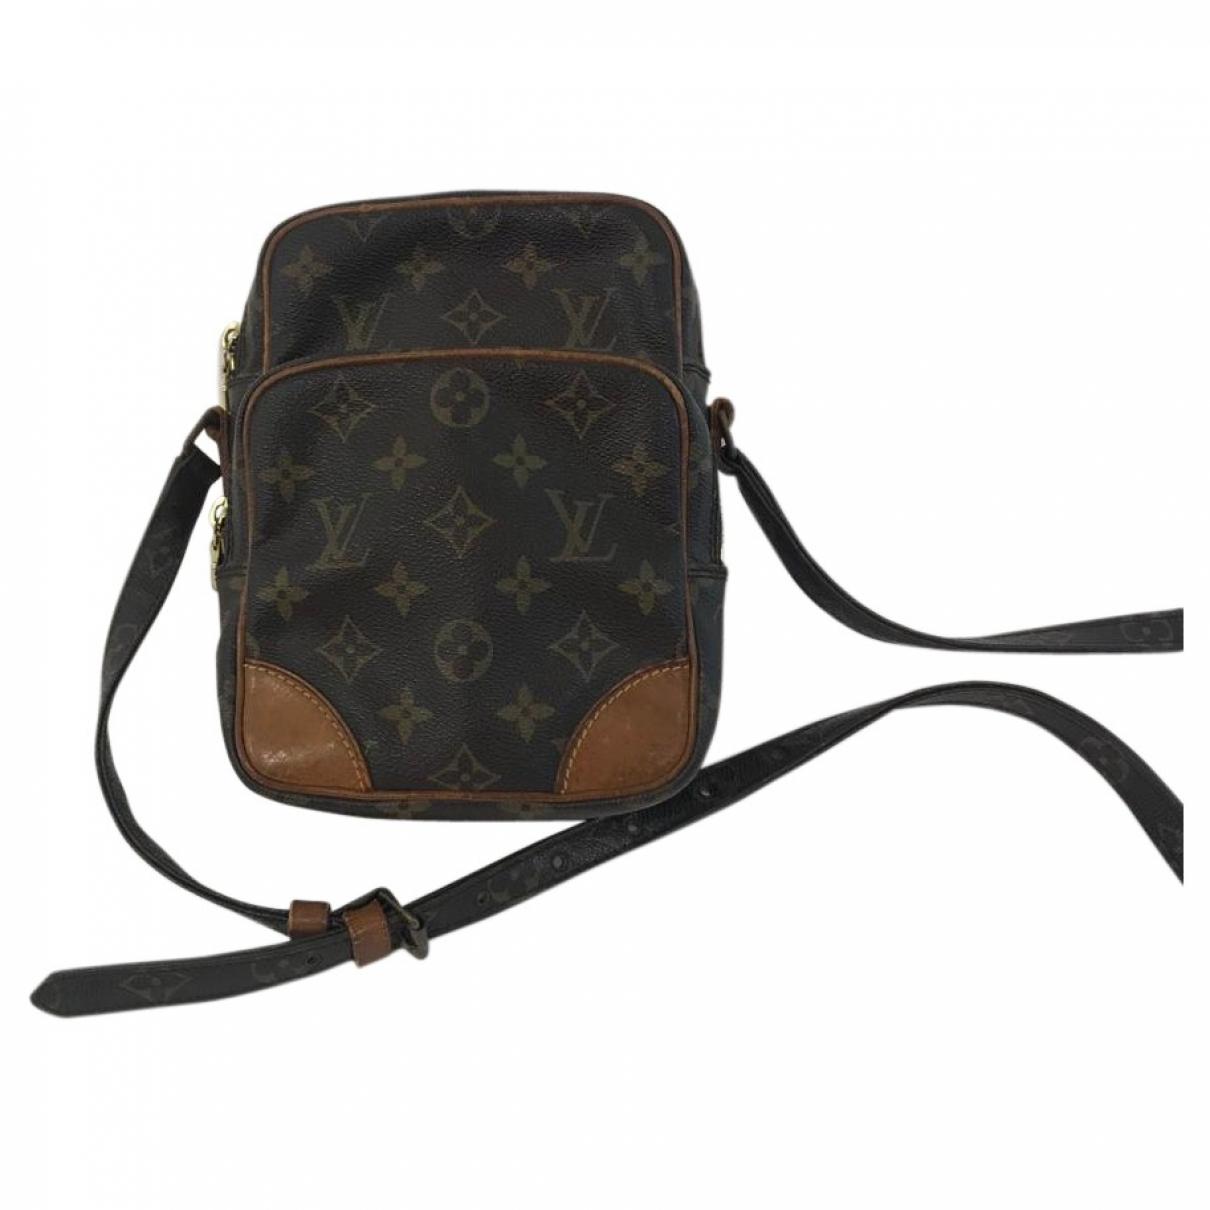 Louis Vuitton Like Bags  Natural Resource Department